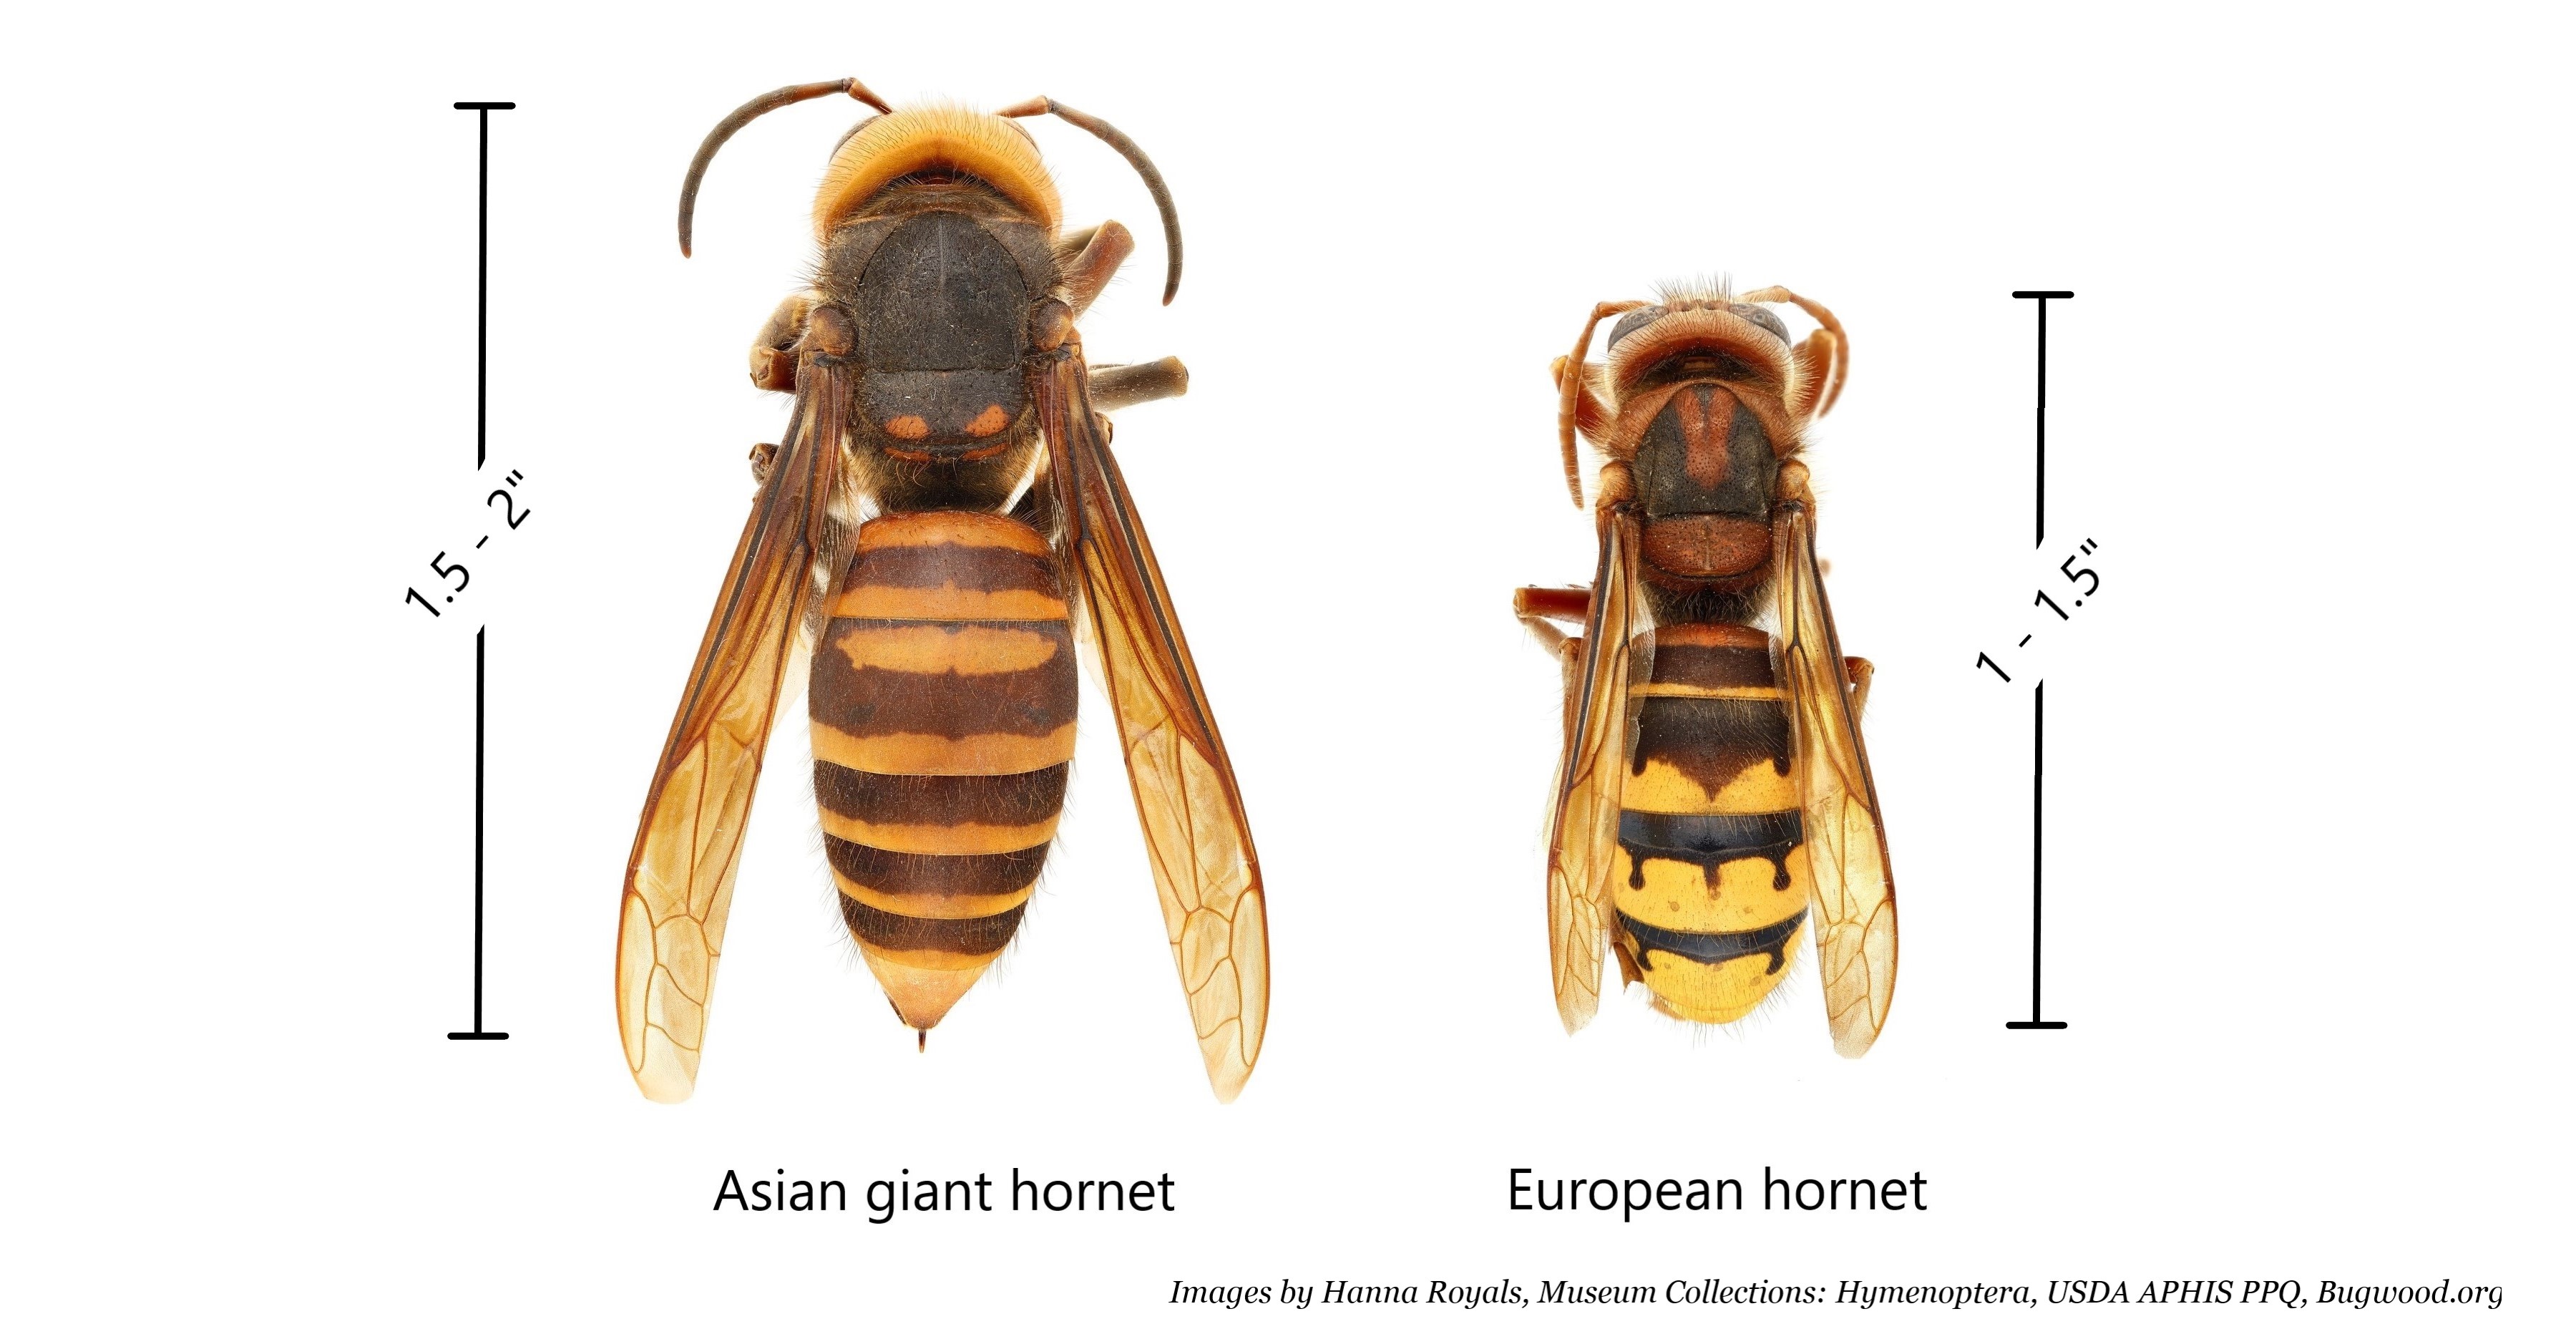 Murder Hornets,' with sting that can kill, land in U.S.